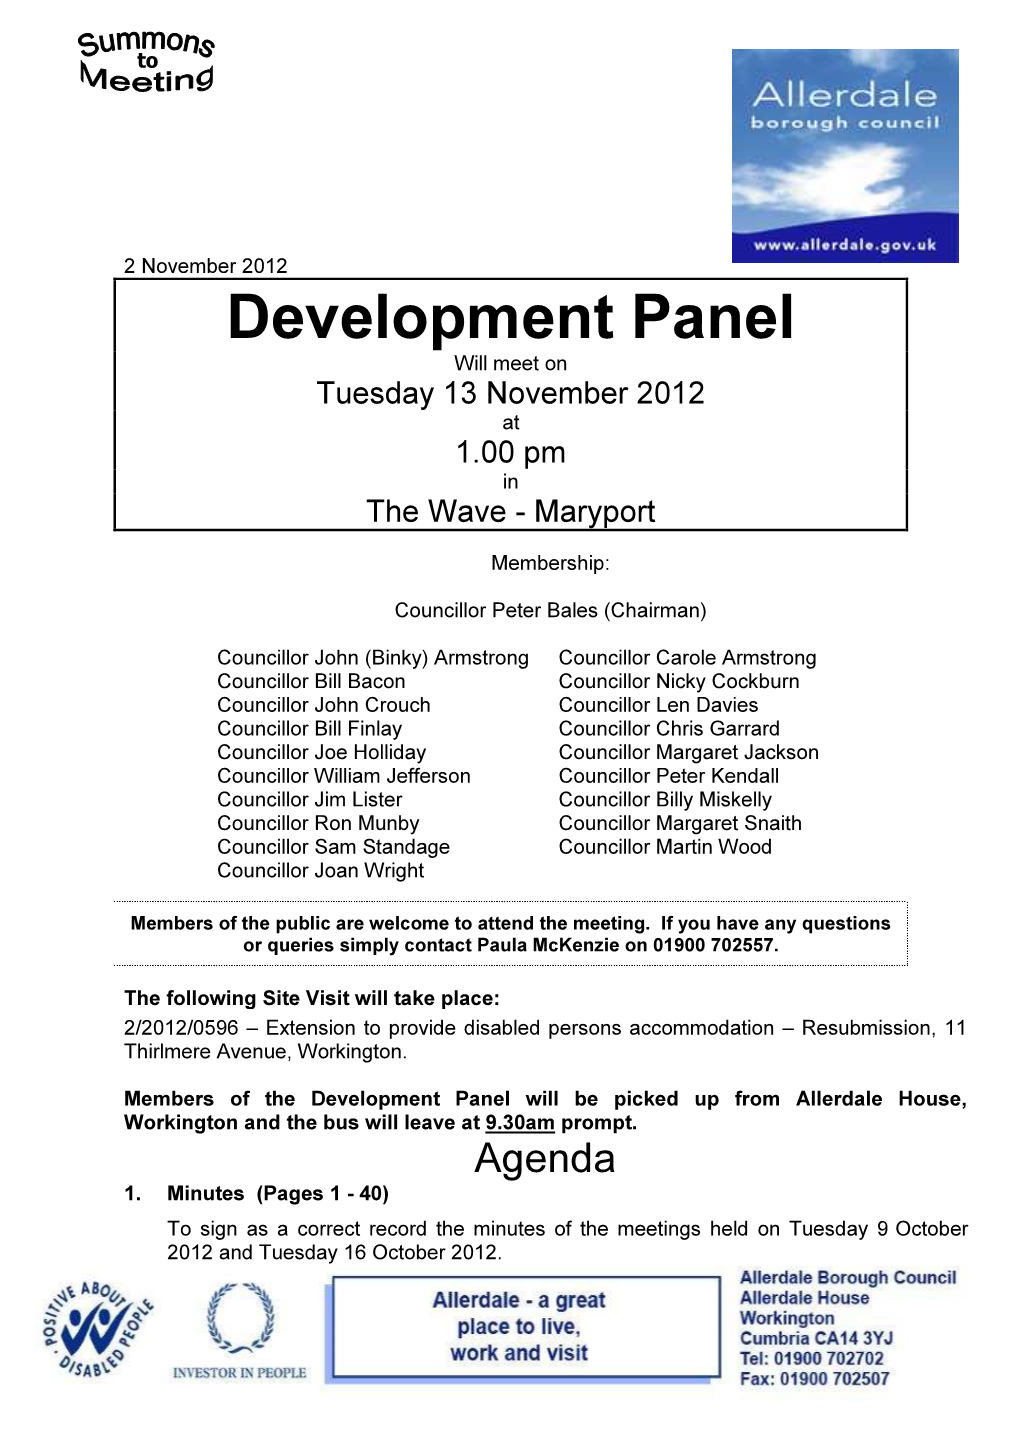 Development Panel Will Meet on Tuesday 13 November 2012 at 1.00 Pm in the Wave - Maryport